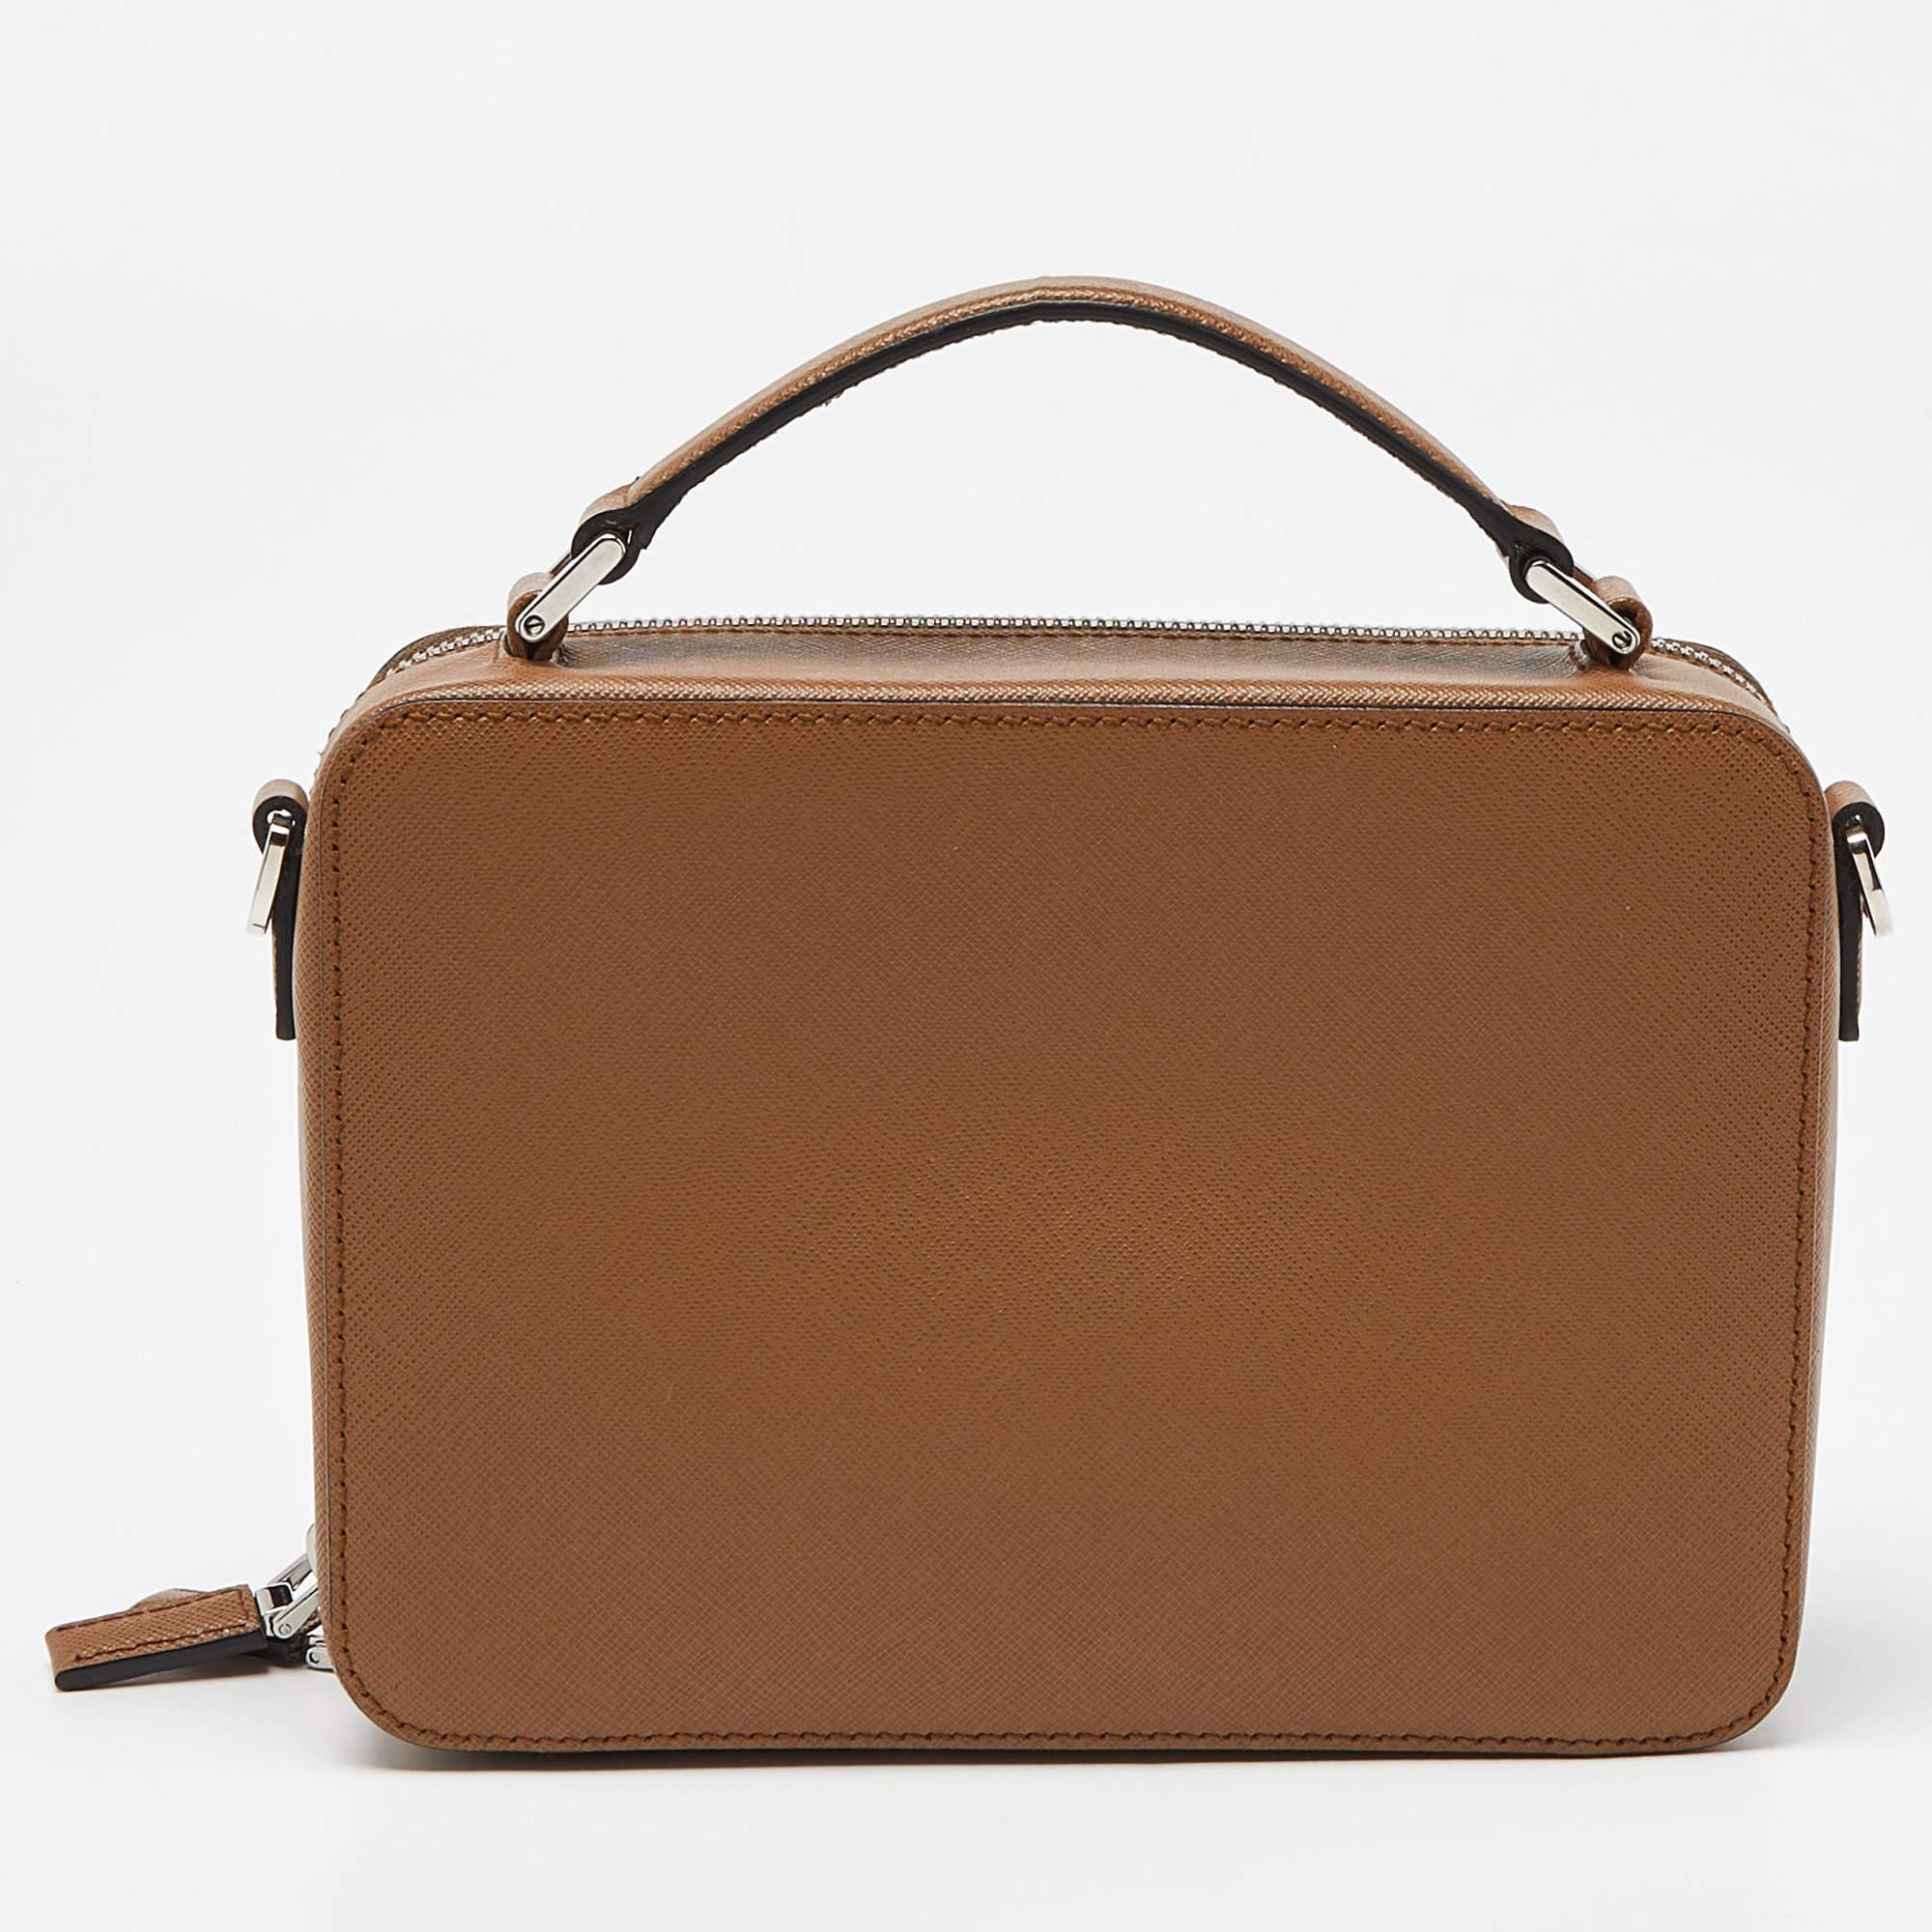 Trust Prada messenger bags to offer functional ease and a comfortable carrying experience. Smartly designed, the bag has an appealing exterior and a spacious interior. Perfect for work and weekend getaways.

Includes: Authenticity Card, Detachable